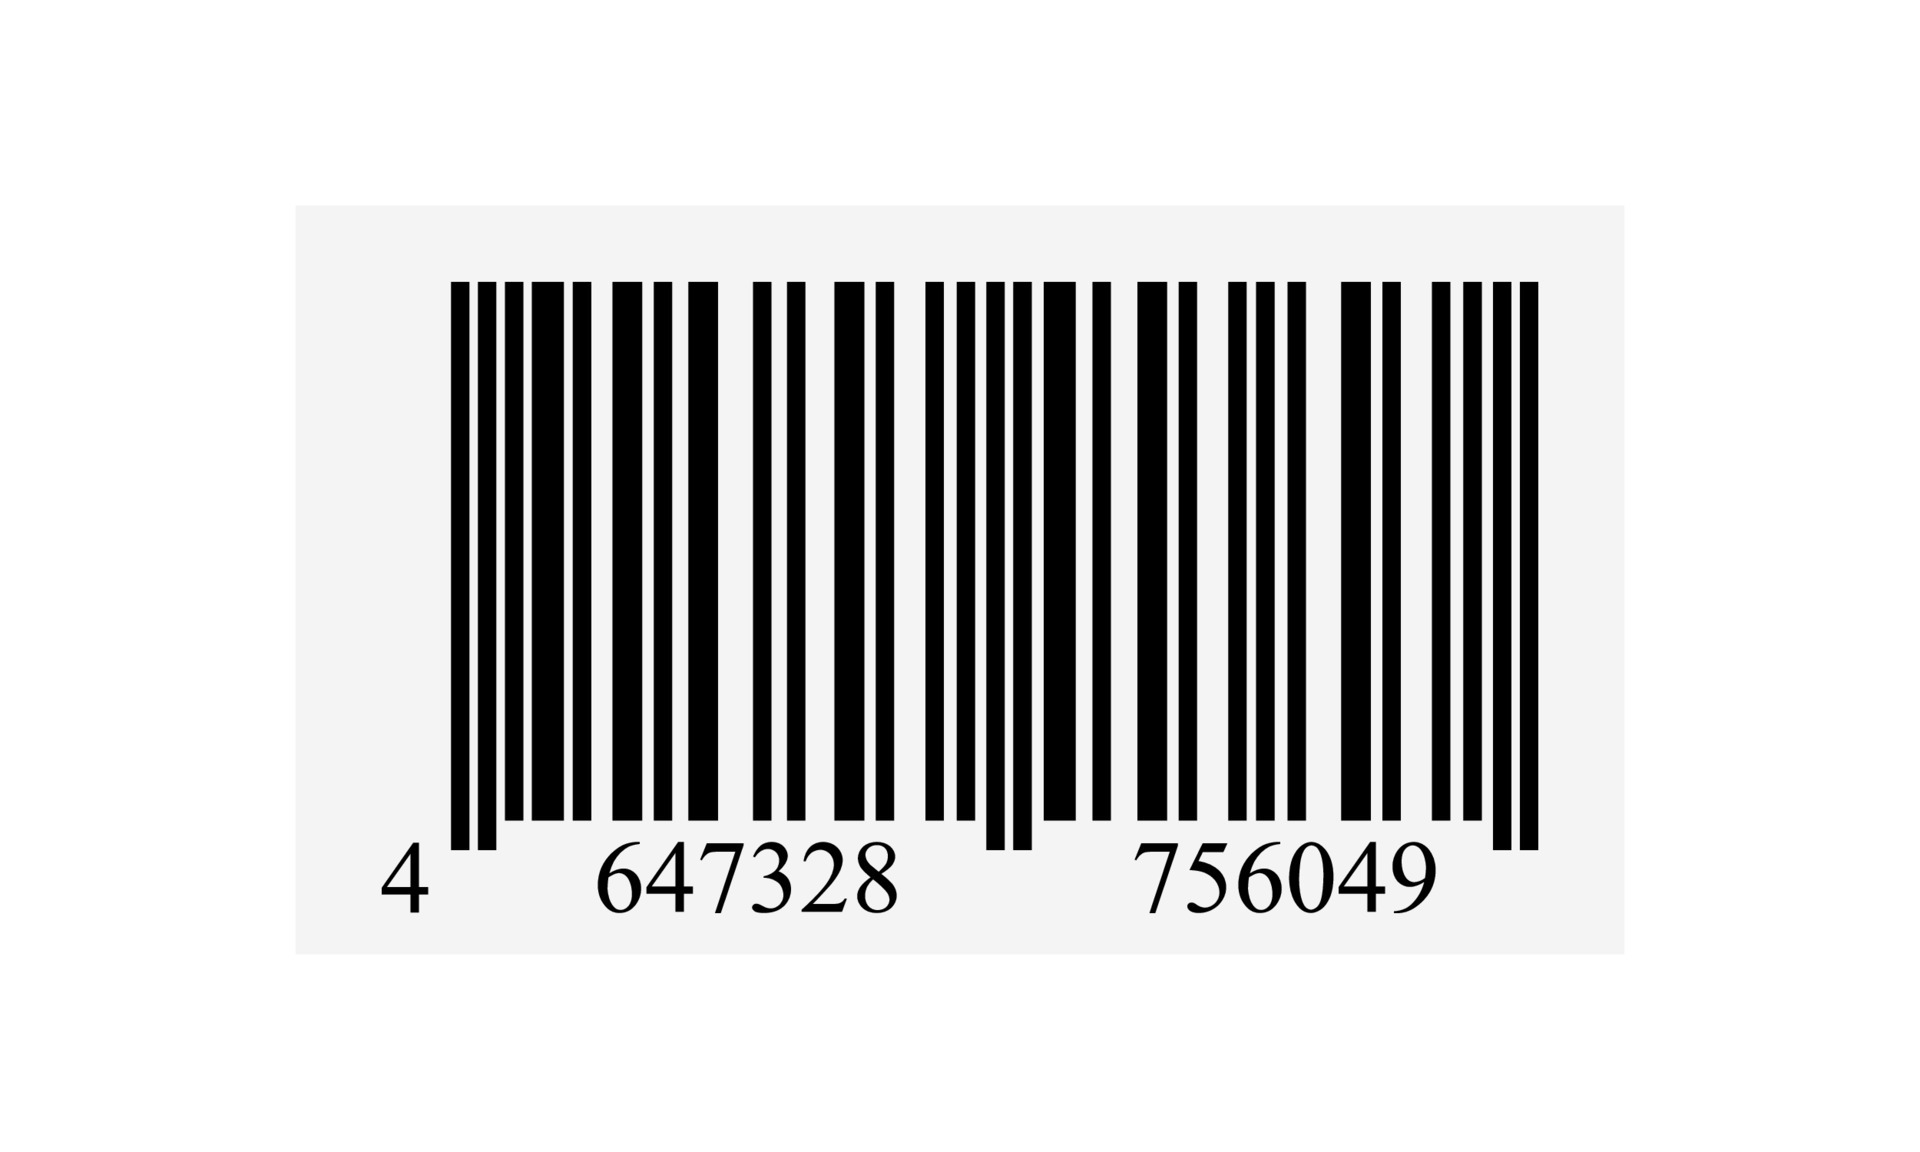 Barcode Art, Icons, and Graphics Free Download